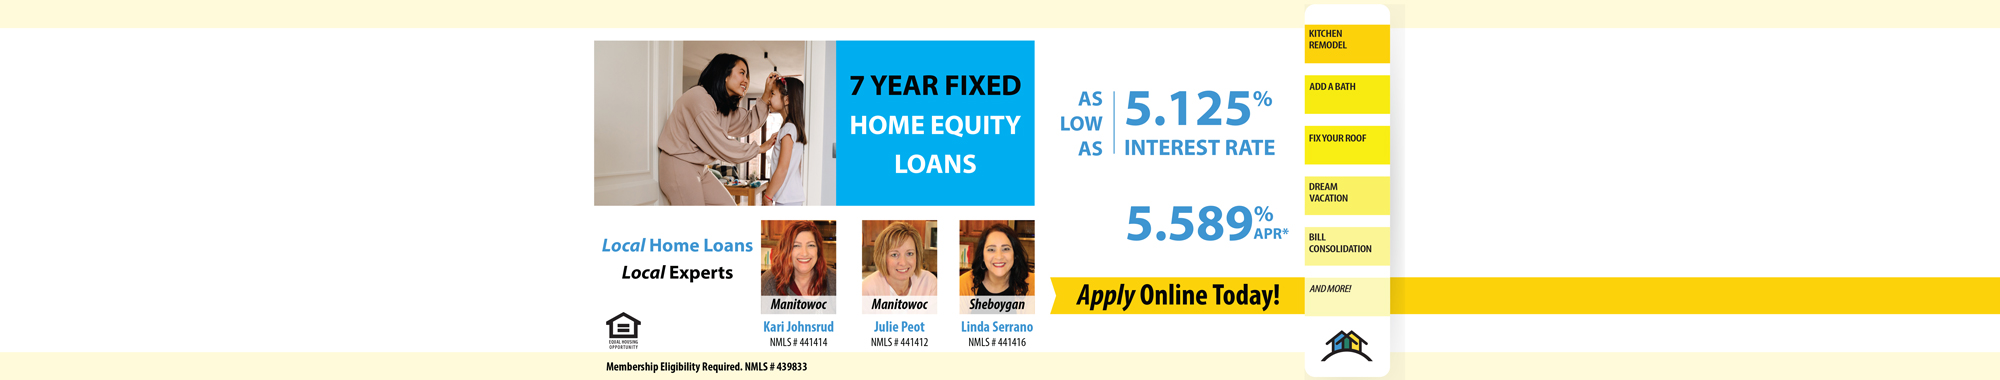 7 YEAR FIXED Home Equity Loan - Apply Oline Today!